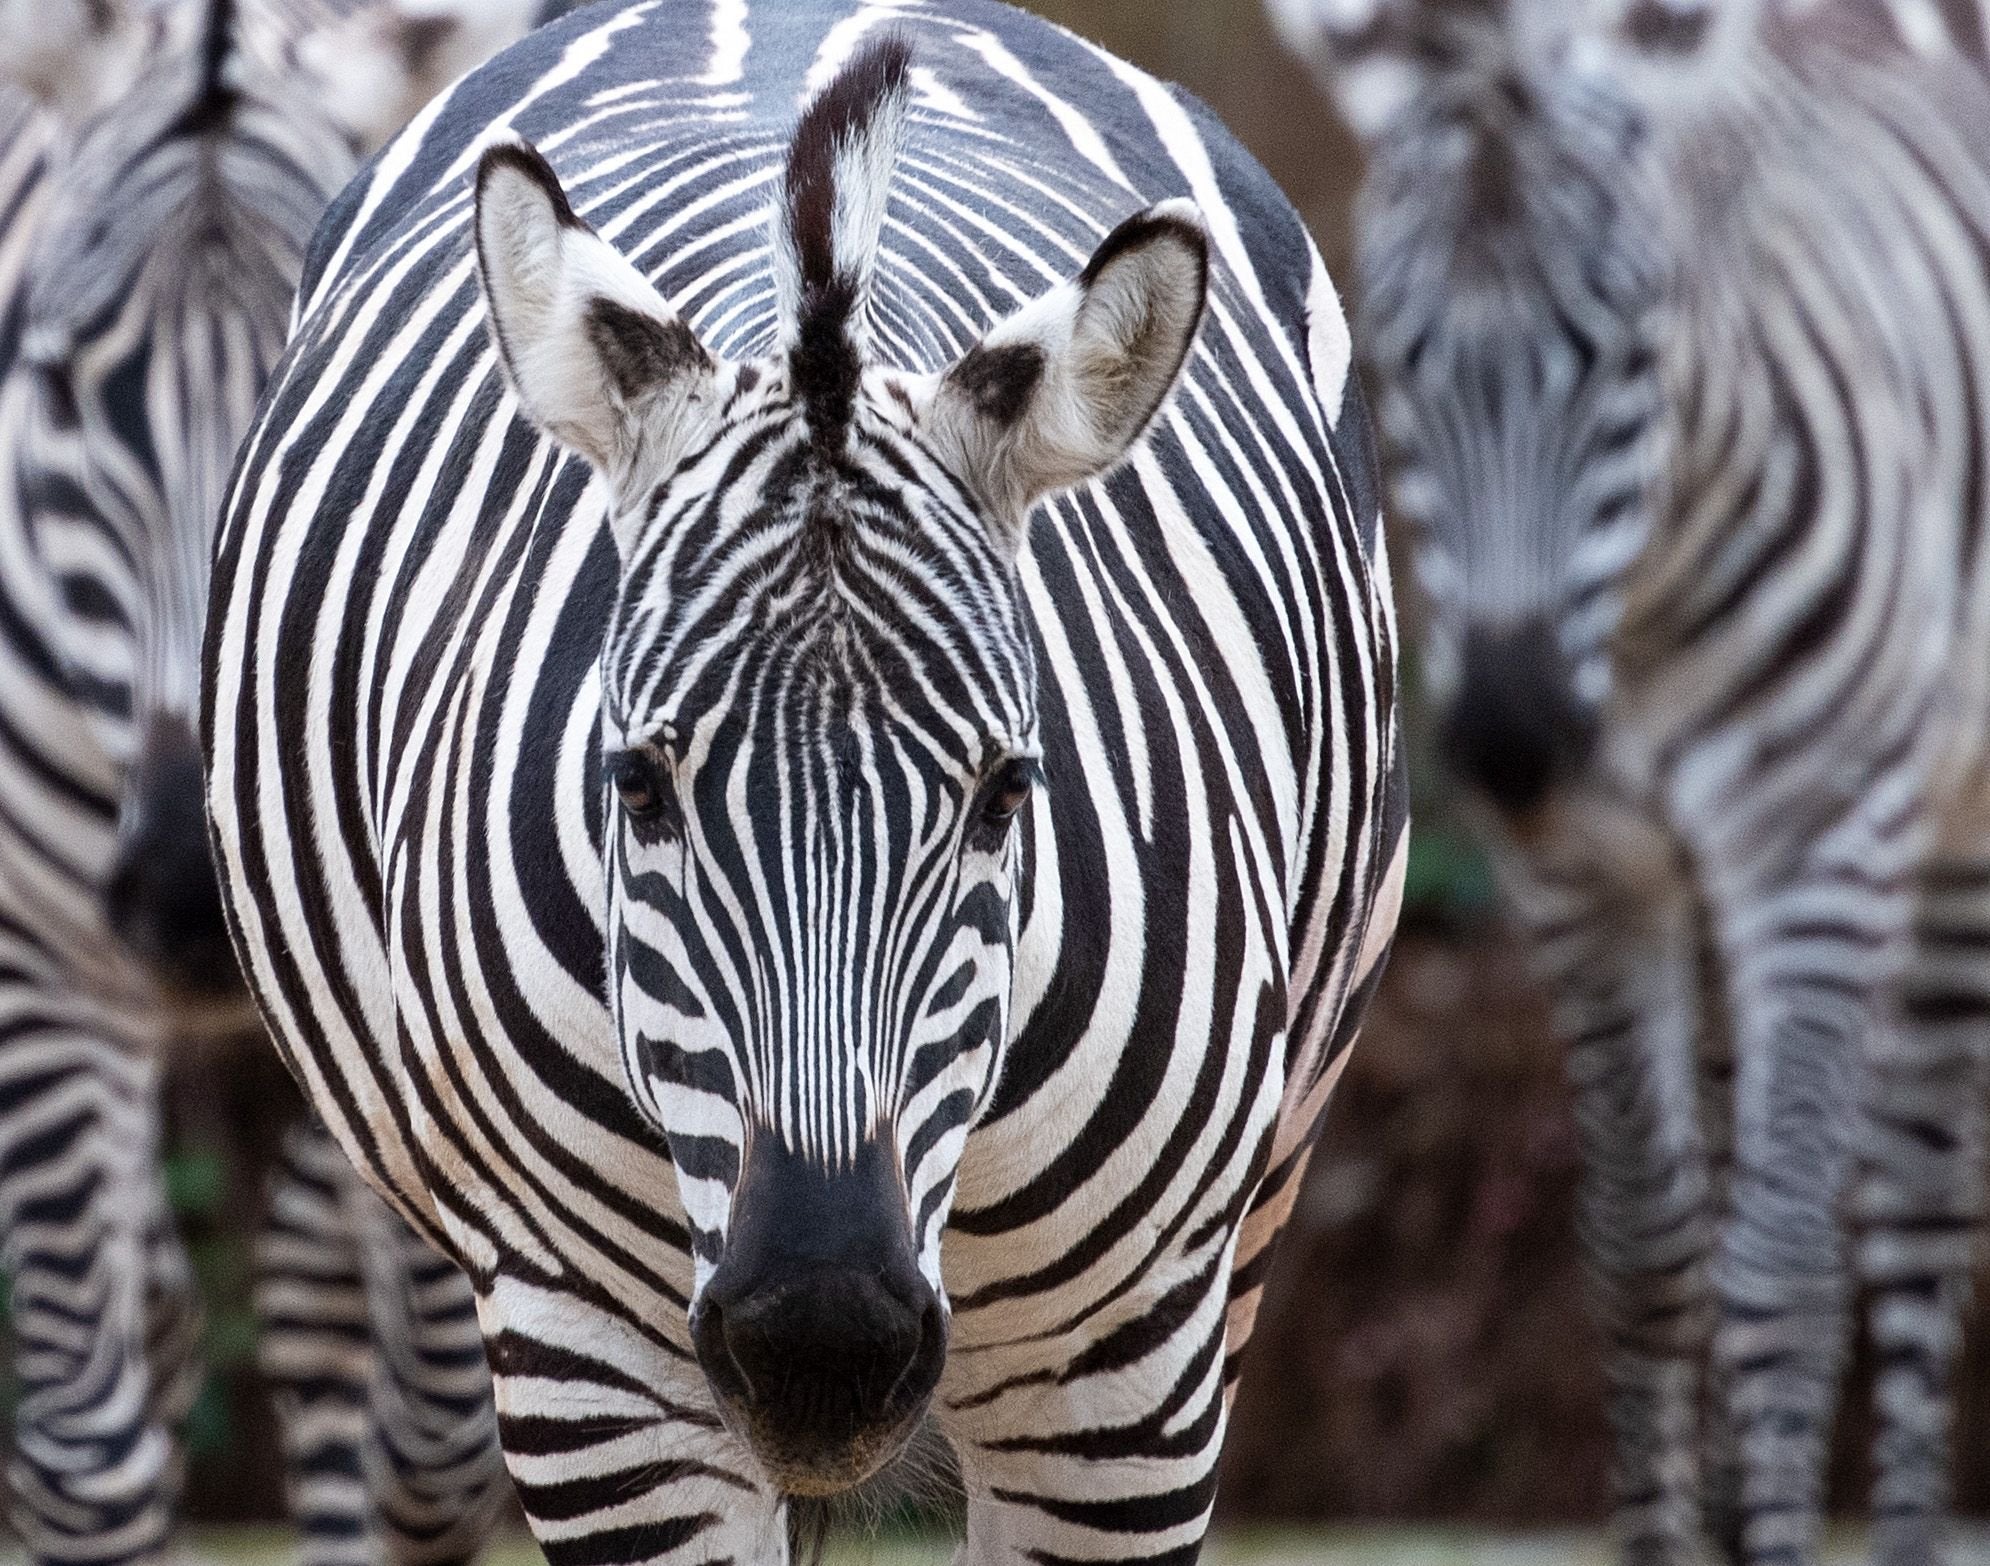 Zebras stand in their outdoor enclosure of a zoo